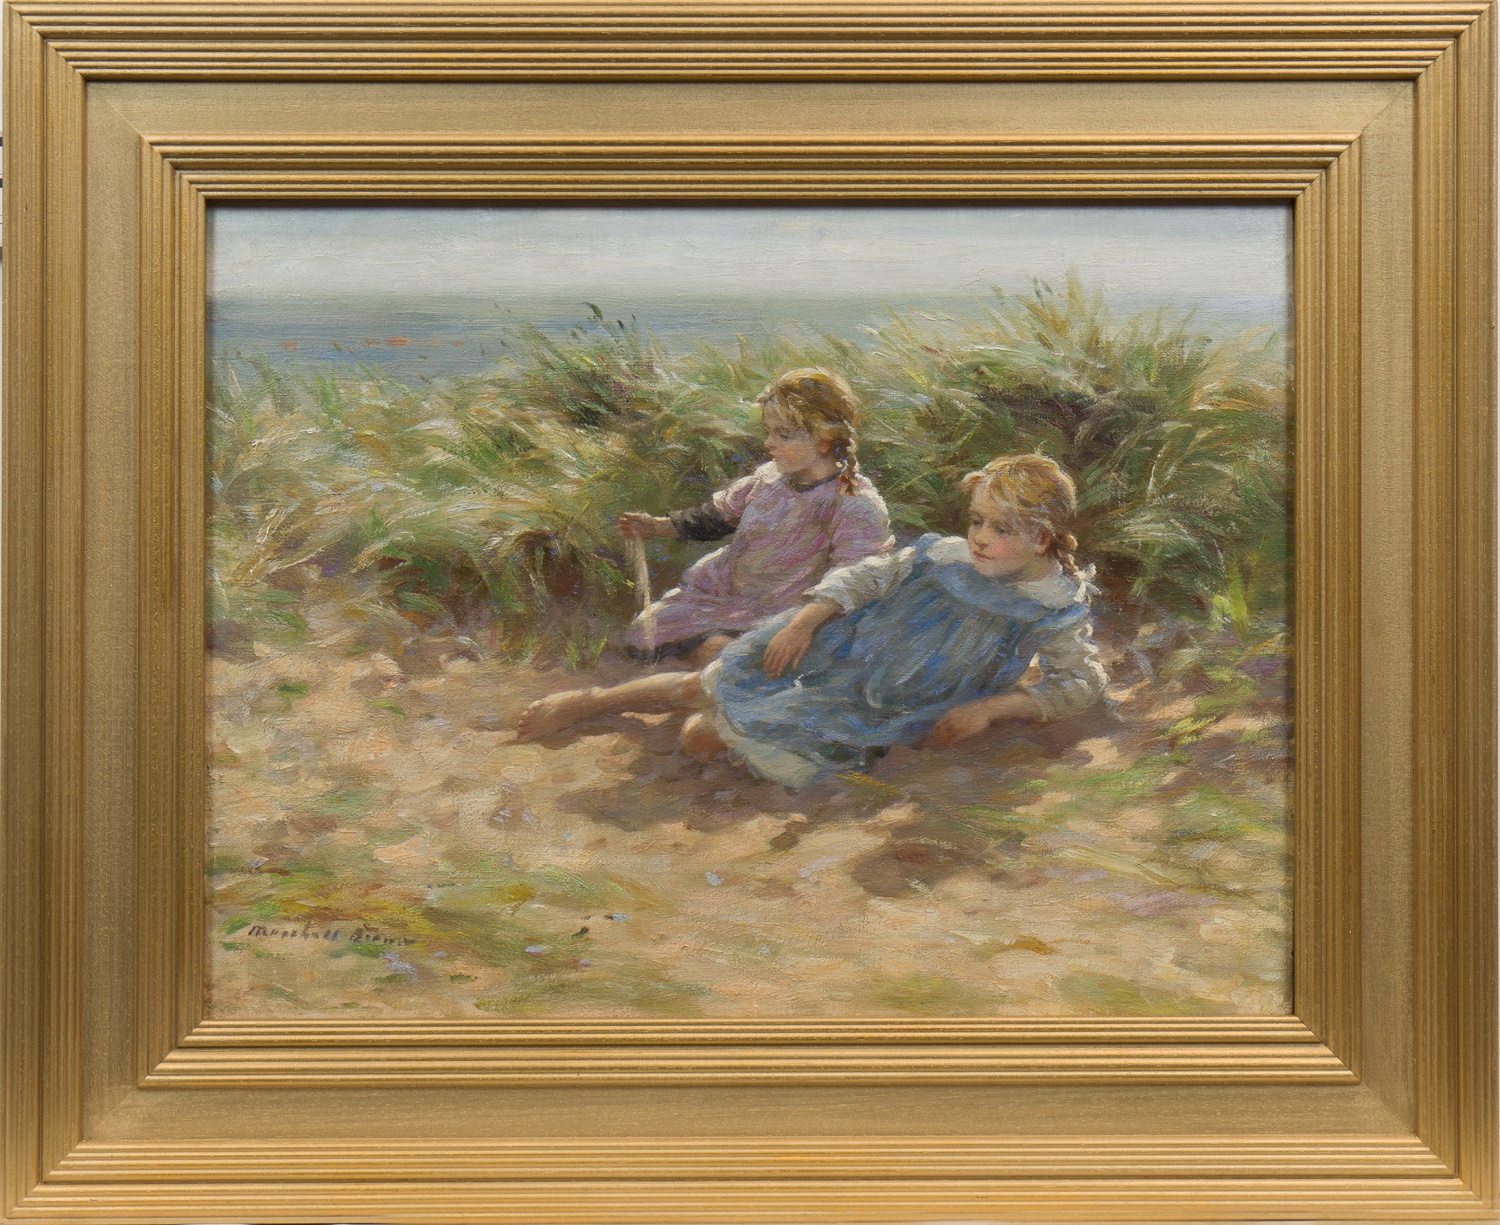 WILLIAM MARSHALL BROWN RSA RSW (SCOTTISH 1863 - 1936), SUMMER DAYS IN THE DUNES oil on canvas,